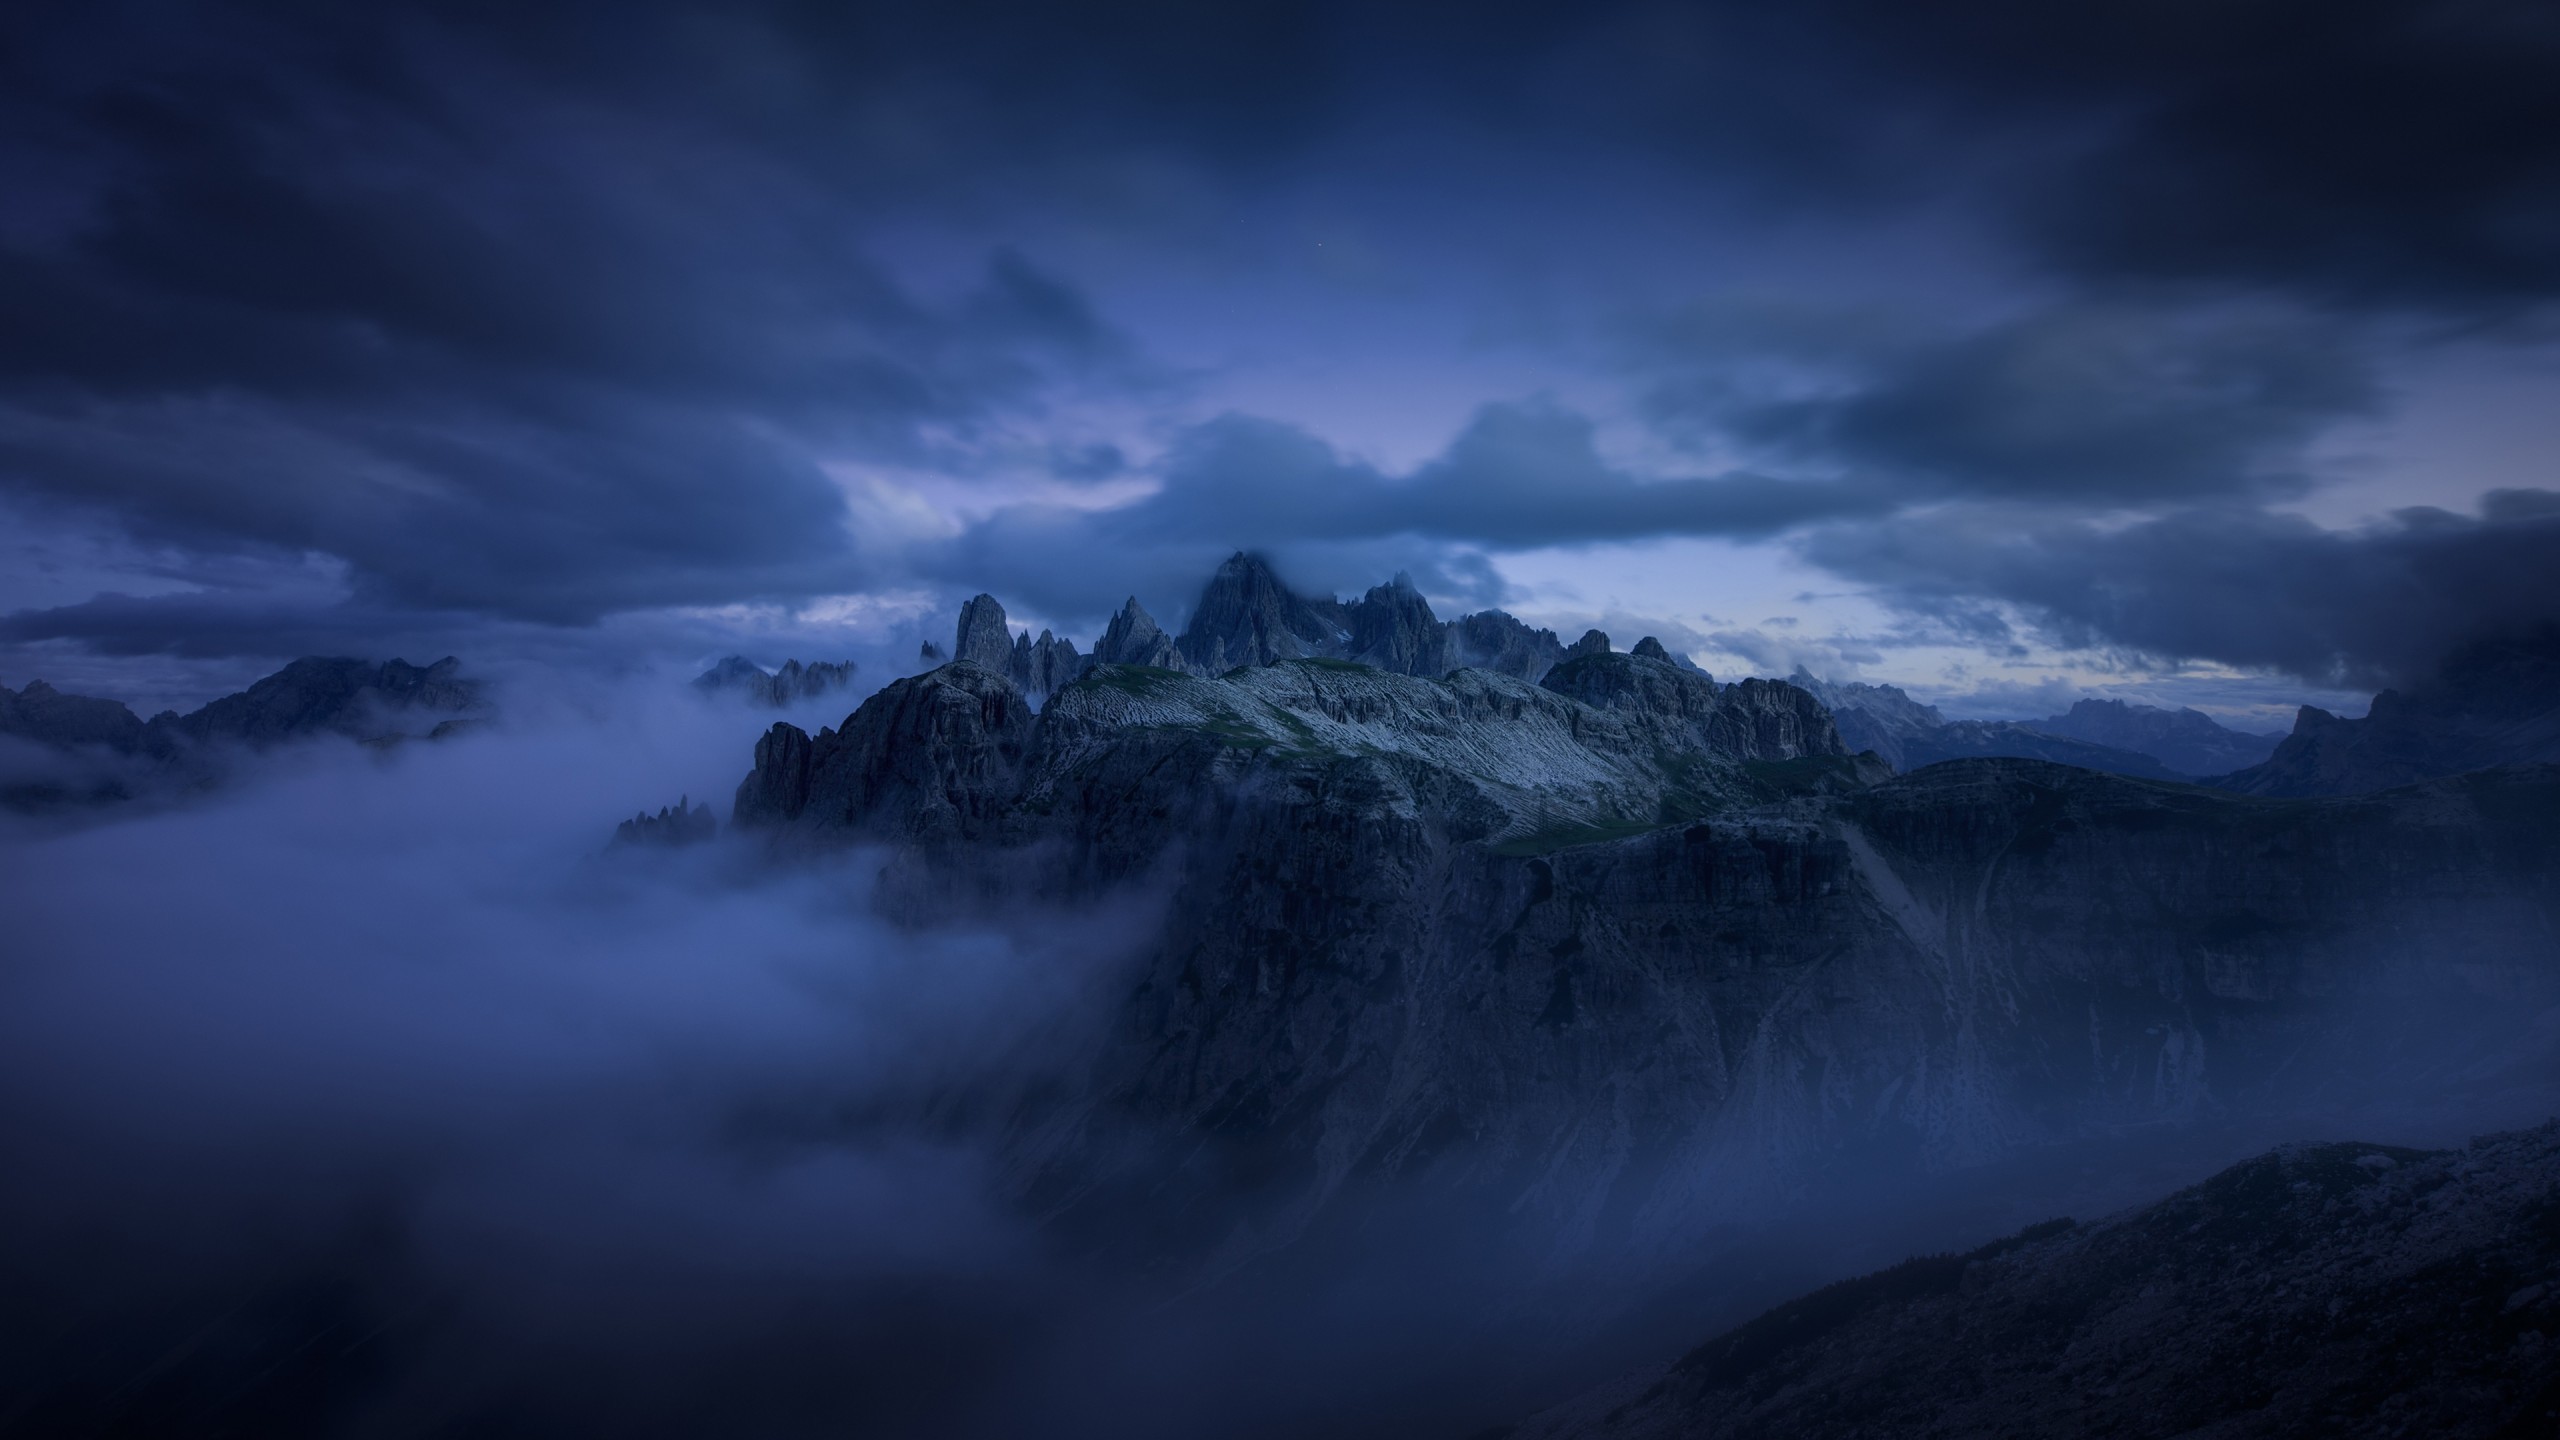 A dark mountain surrounded by clouds